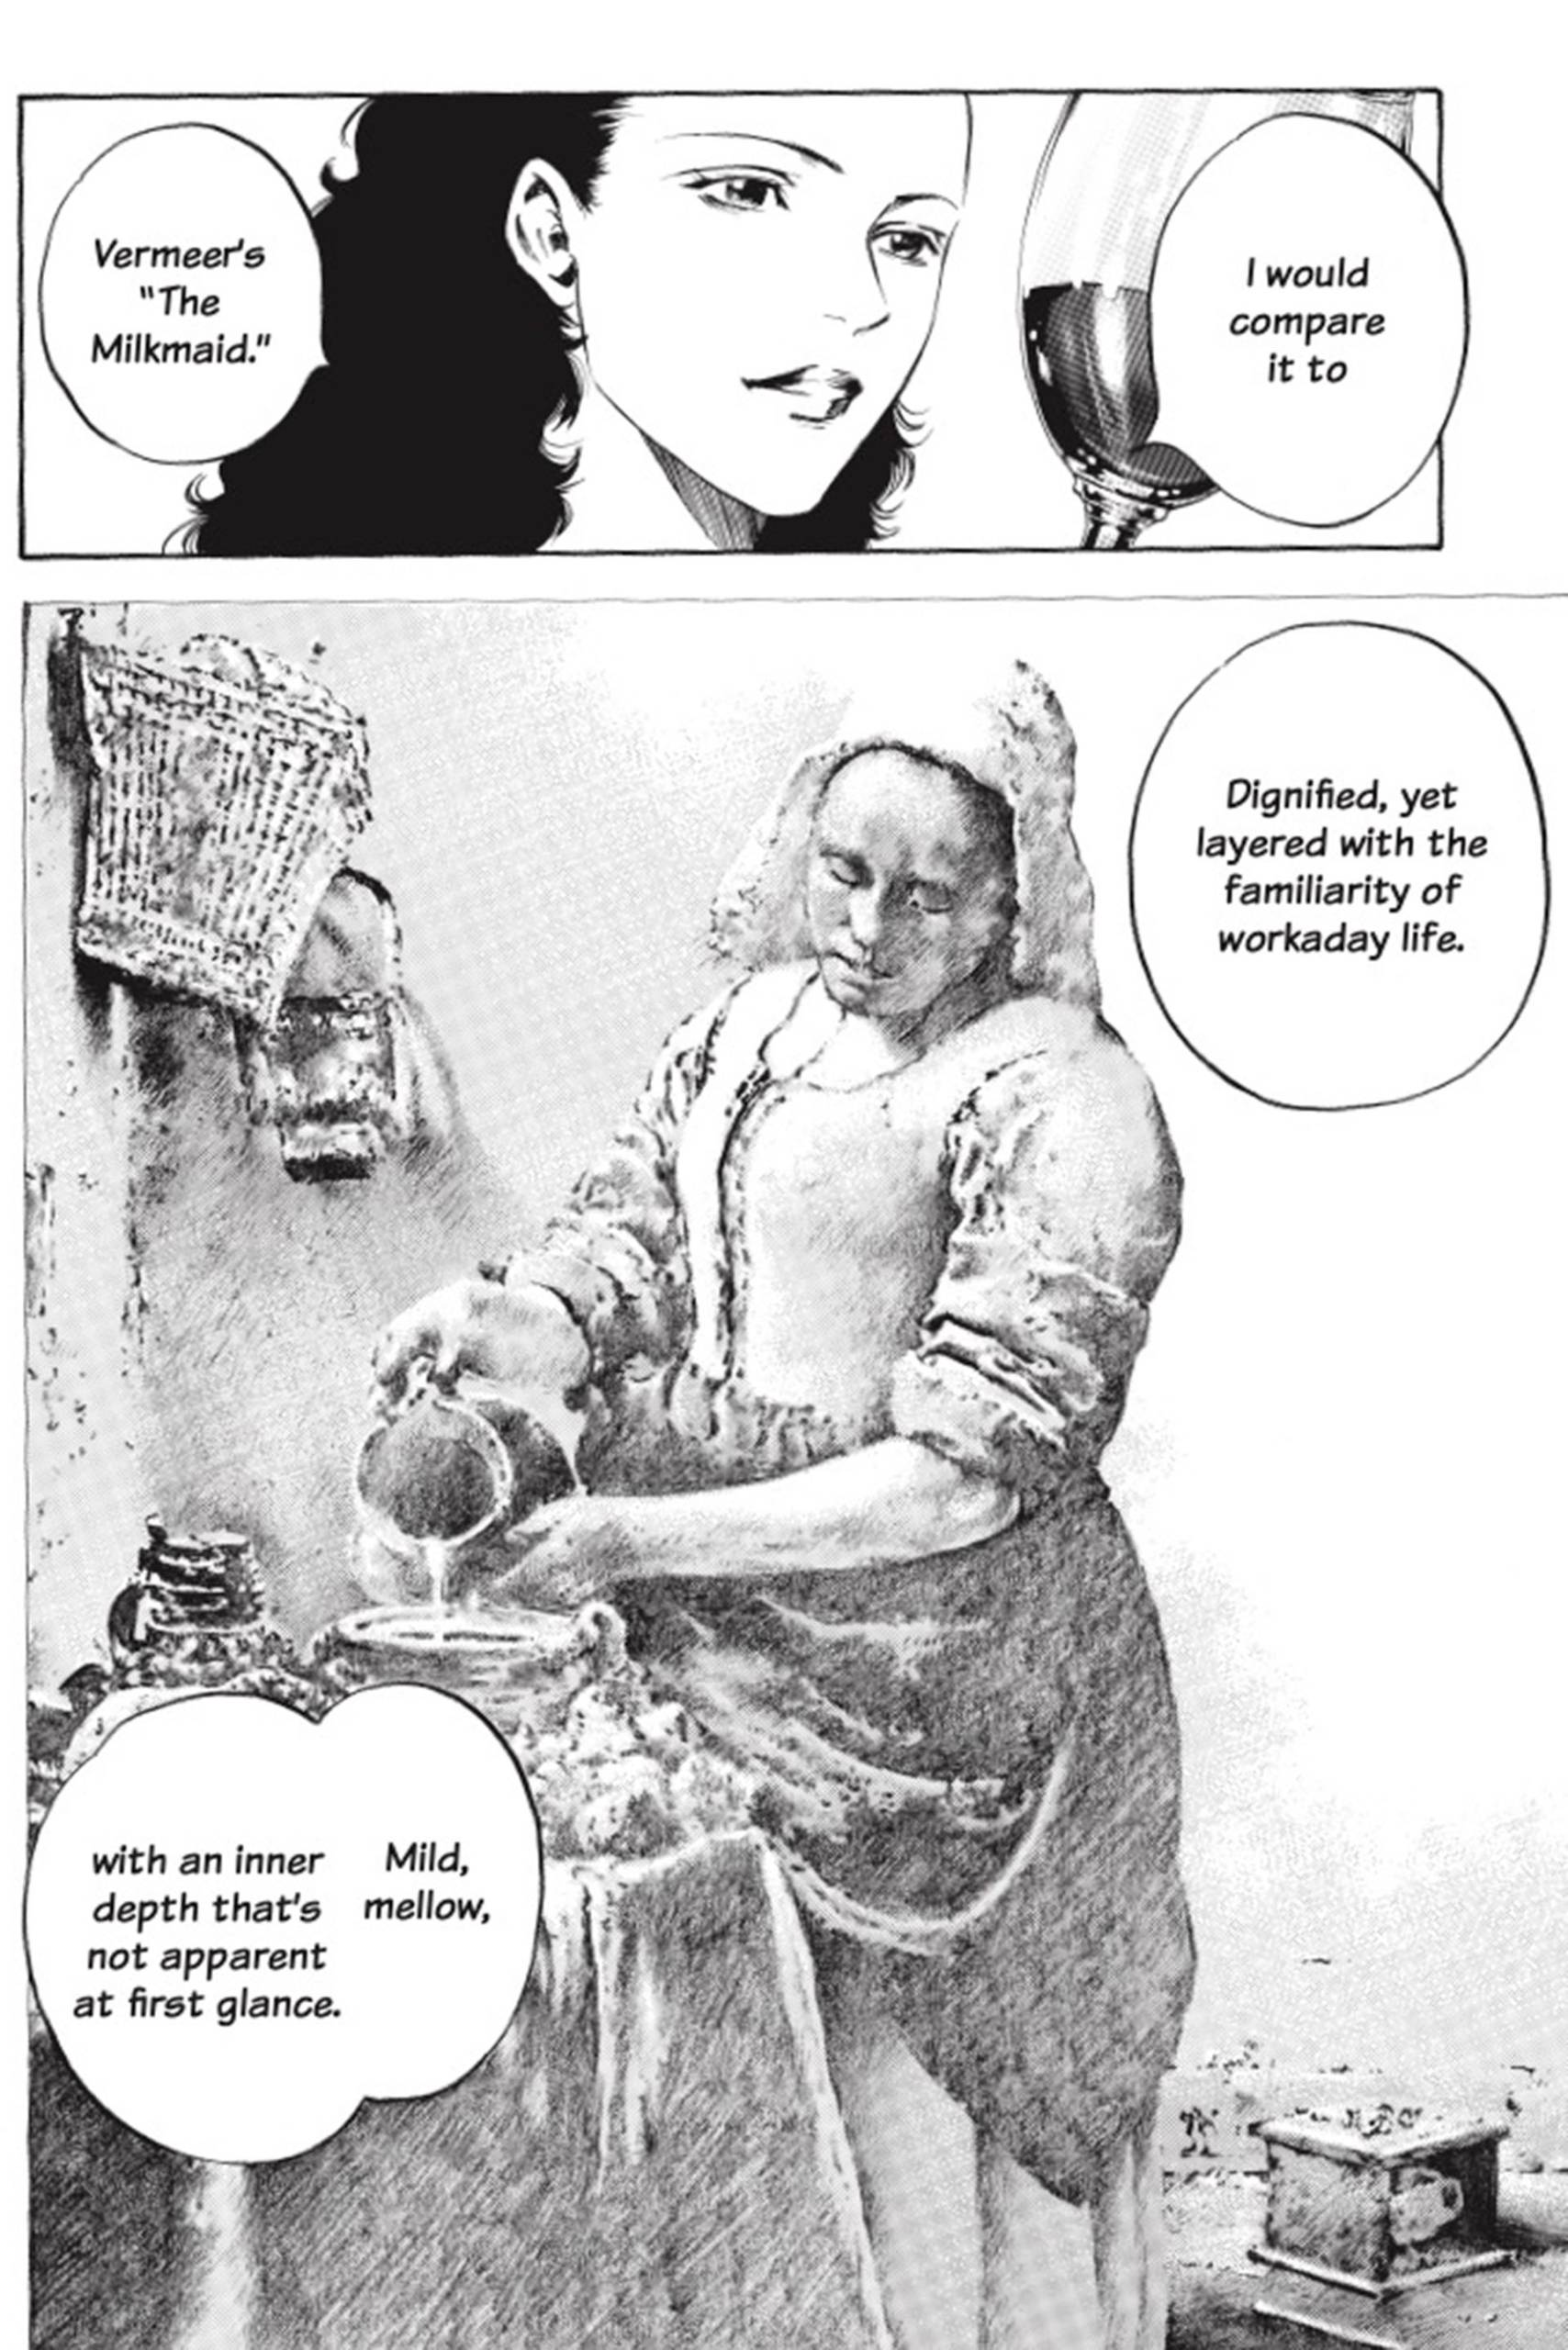 A page from the English translation of a manga. In the first panel, a woman holding a glass of wine says, "I would compare it to Vermeer's "The Milkmaid." The second panel shows a painting of a milkmaid, with the text: "Dignified, yet layered with the familiarity of workaday life. Mild, mellow, with an inner depth that's not apparent at first glance."